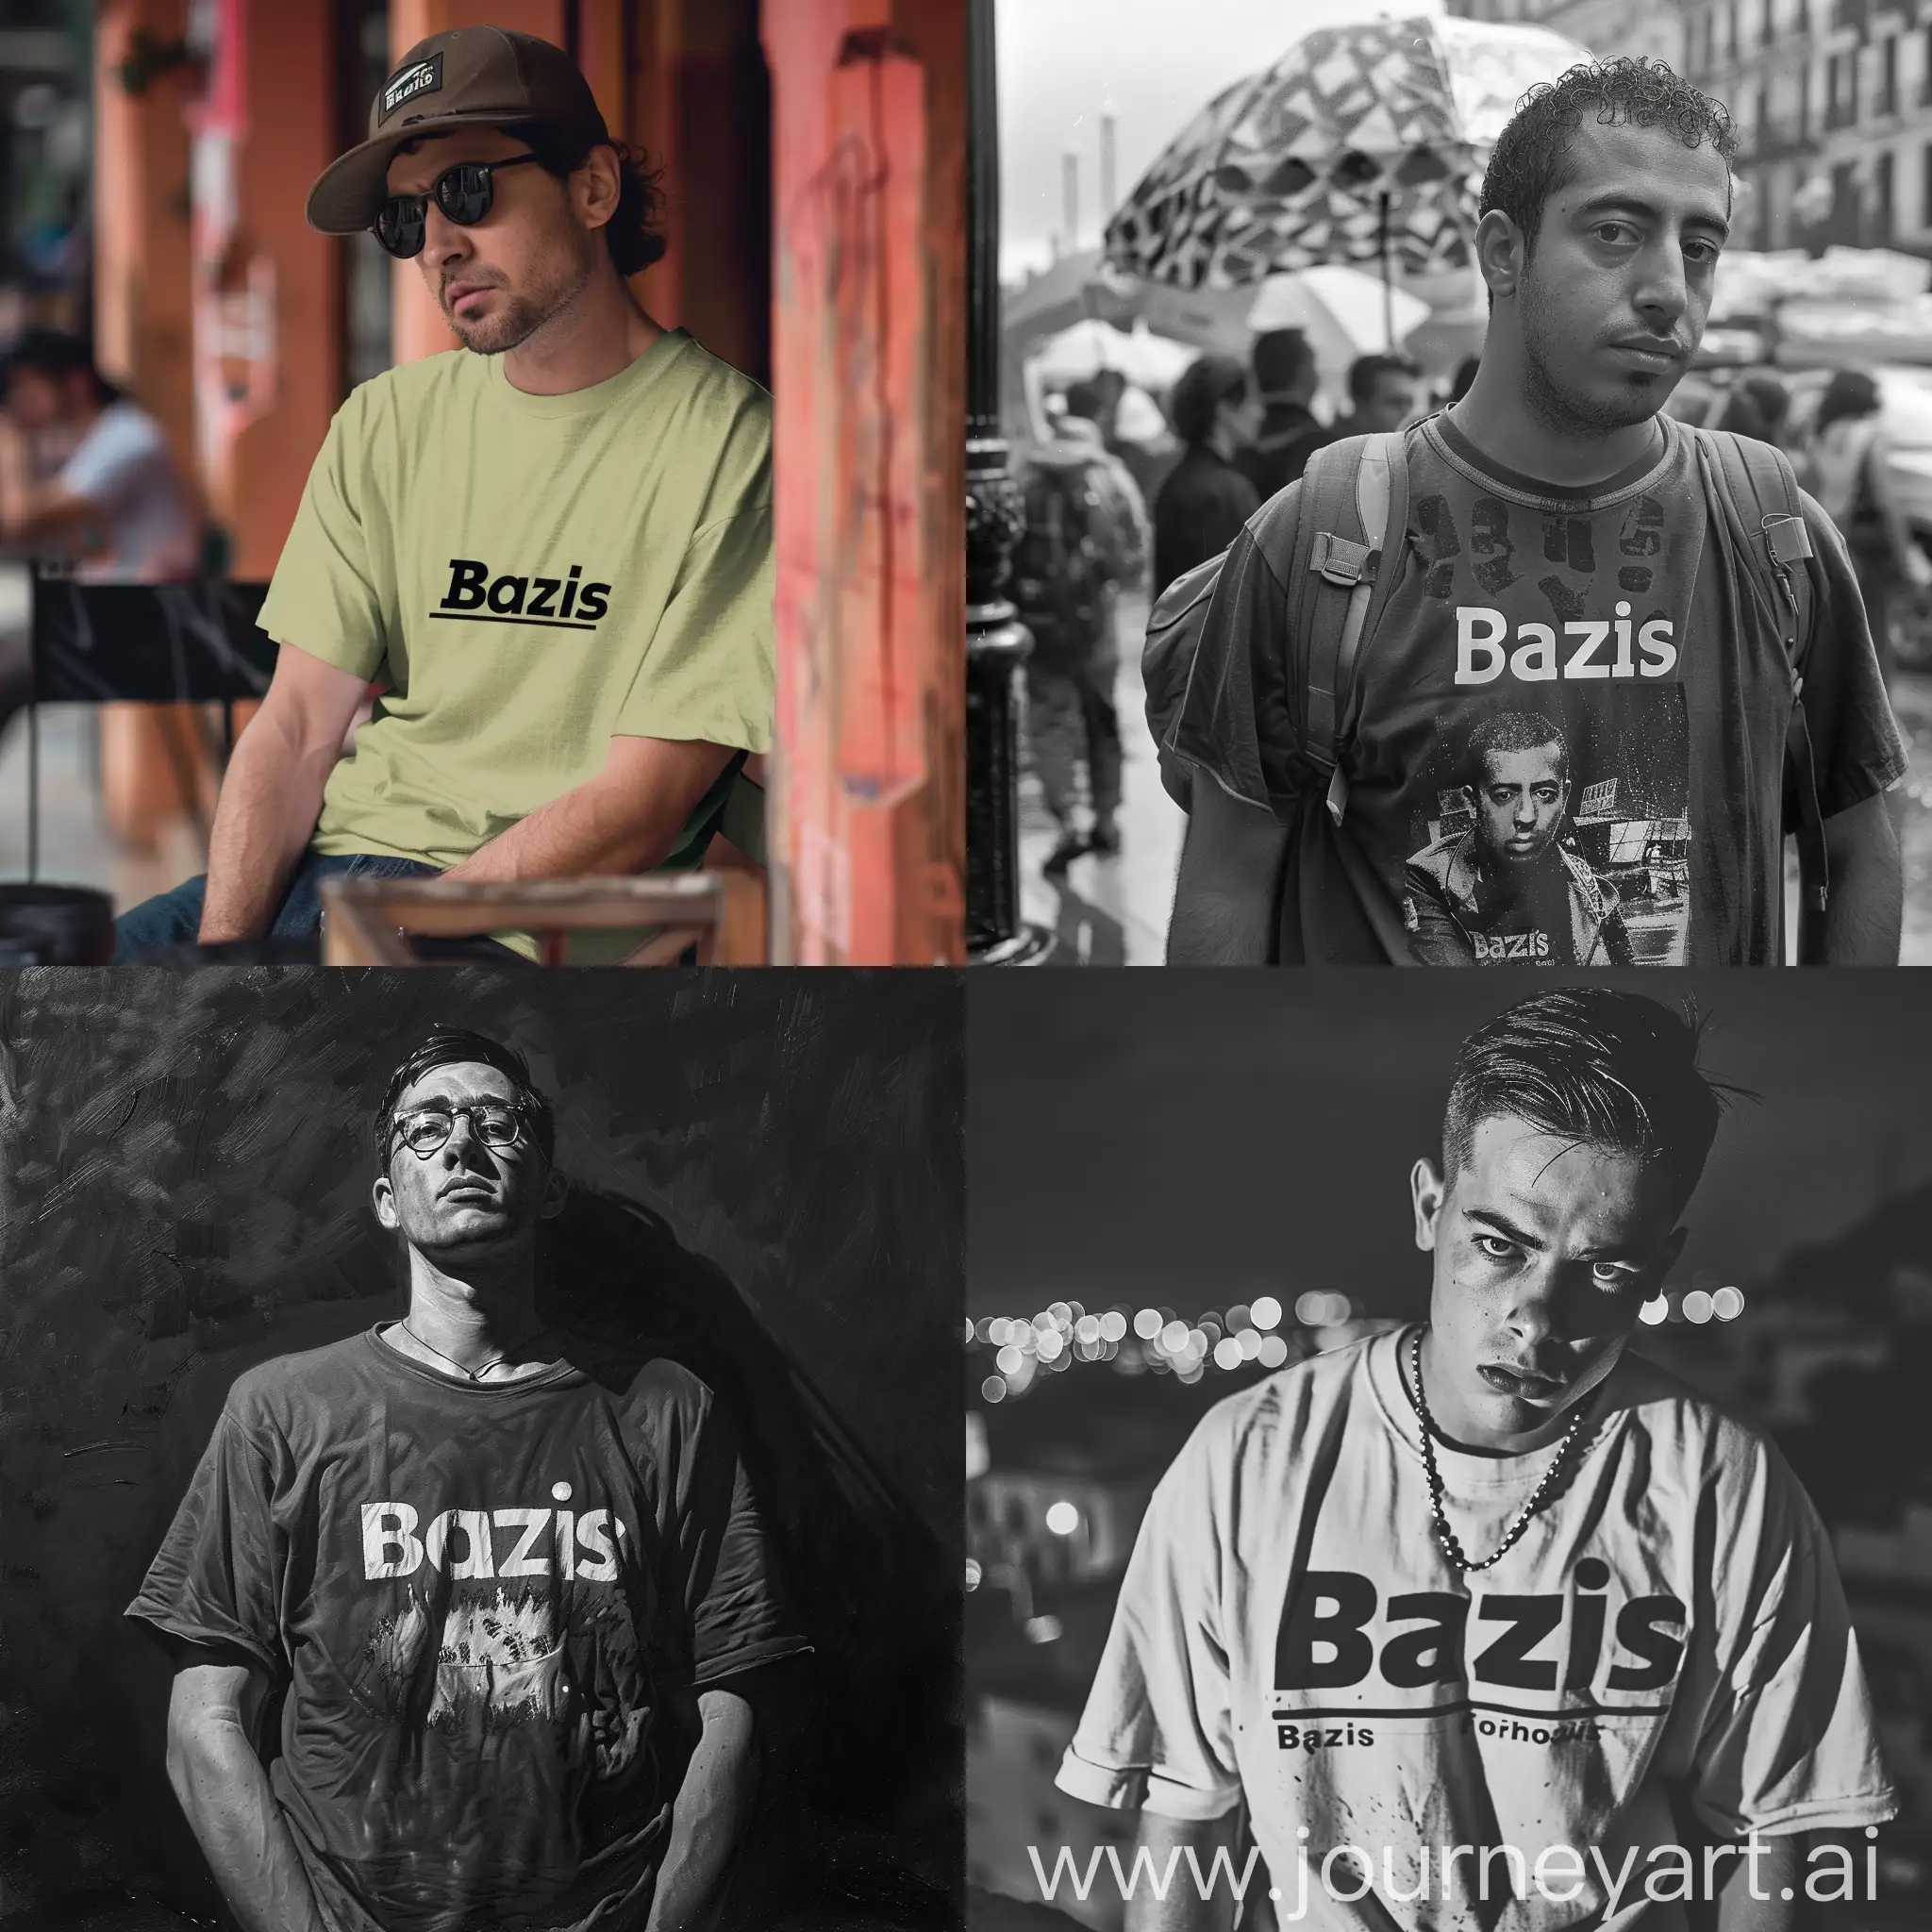 man wearing a T-shirt with the words “Bazis”